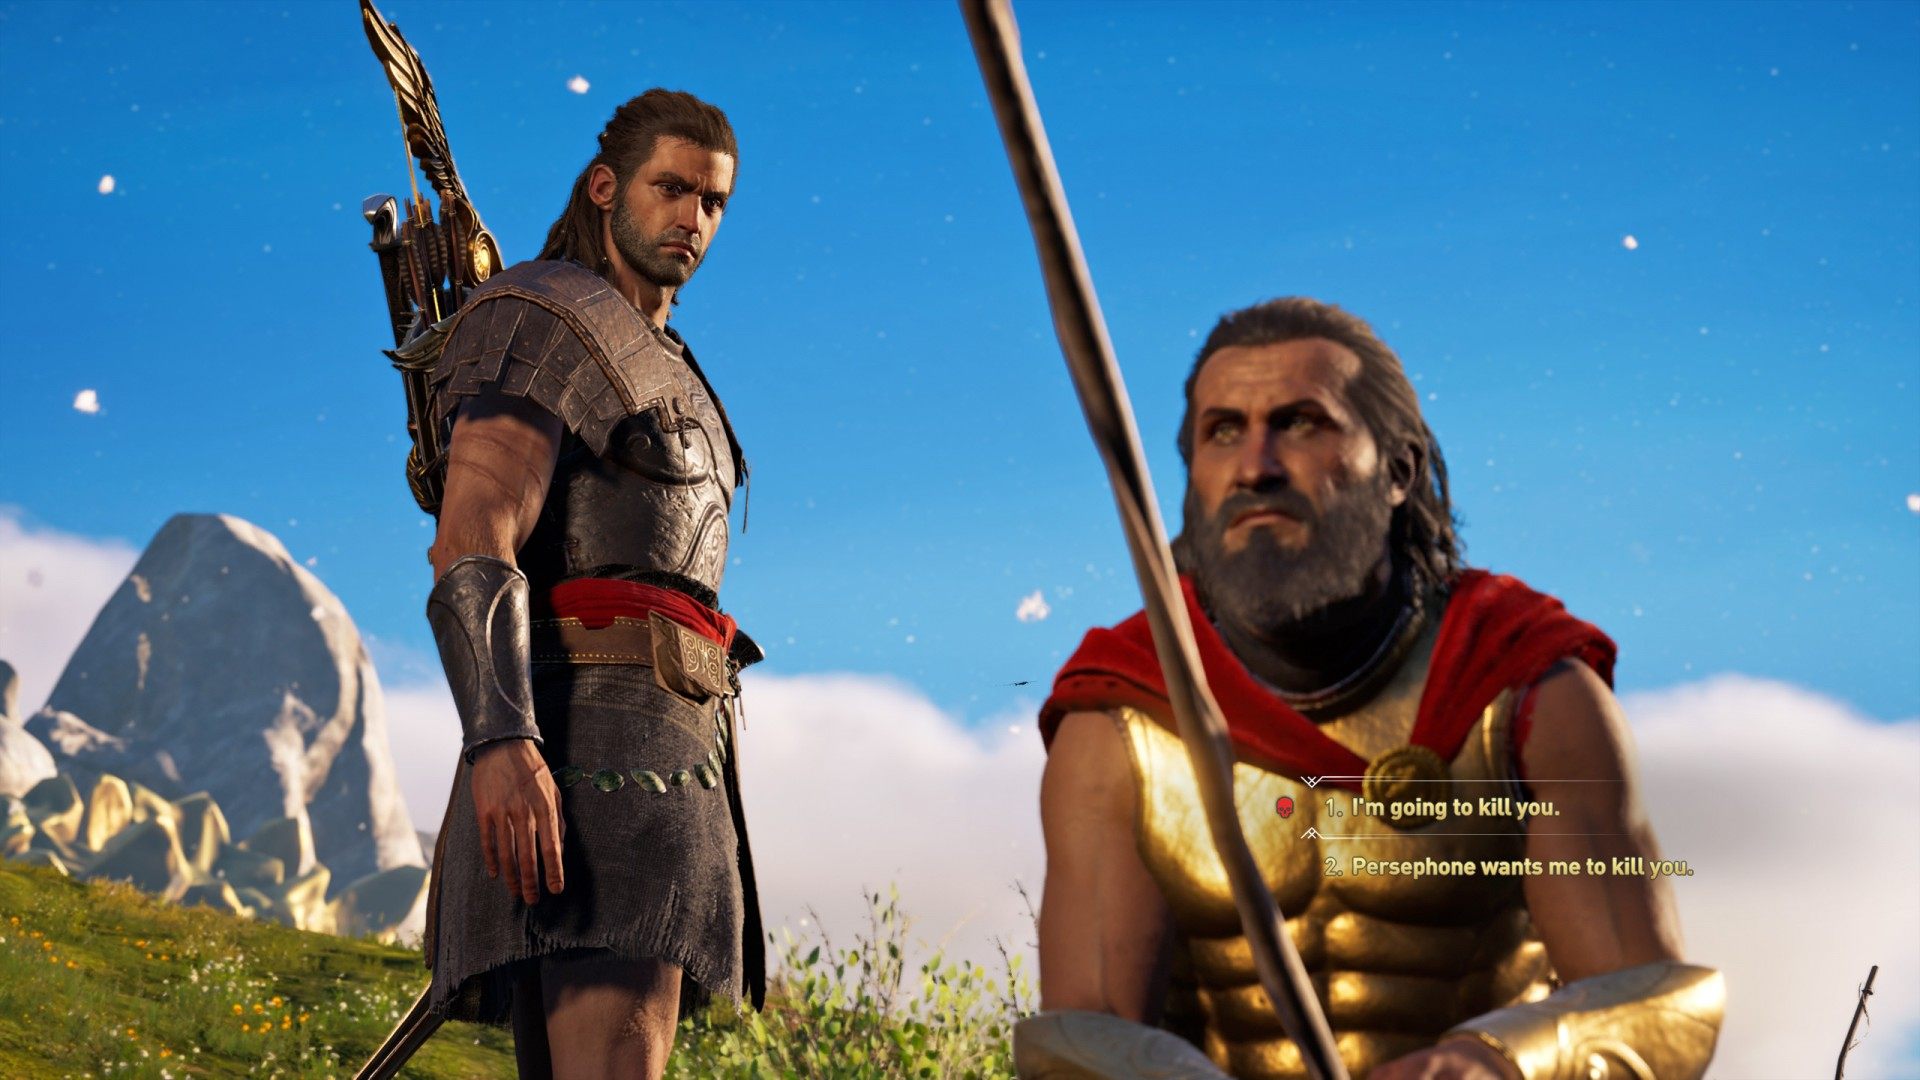 A Life for a Life, Assassin's Creed Odyssey Quest